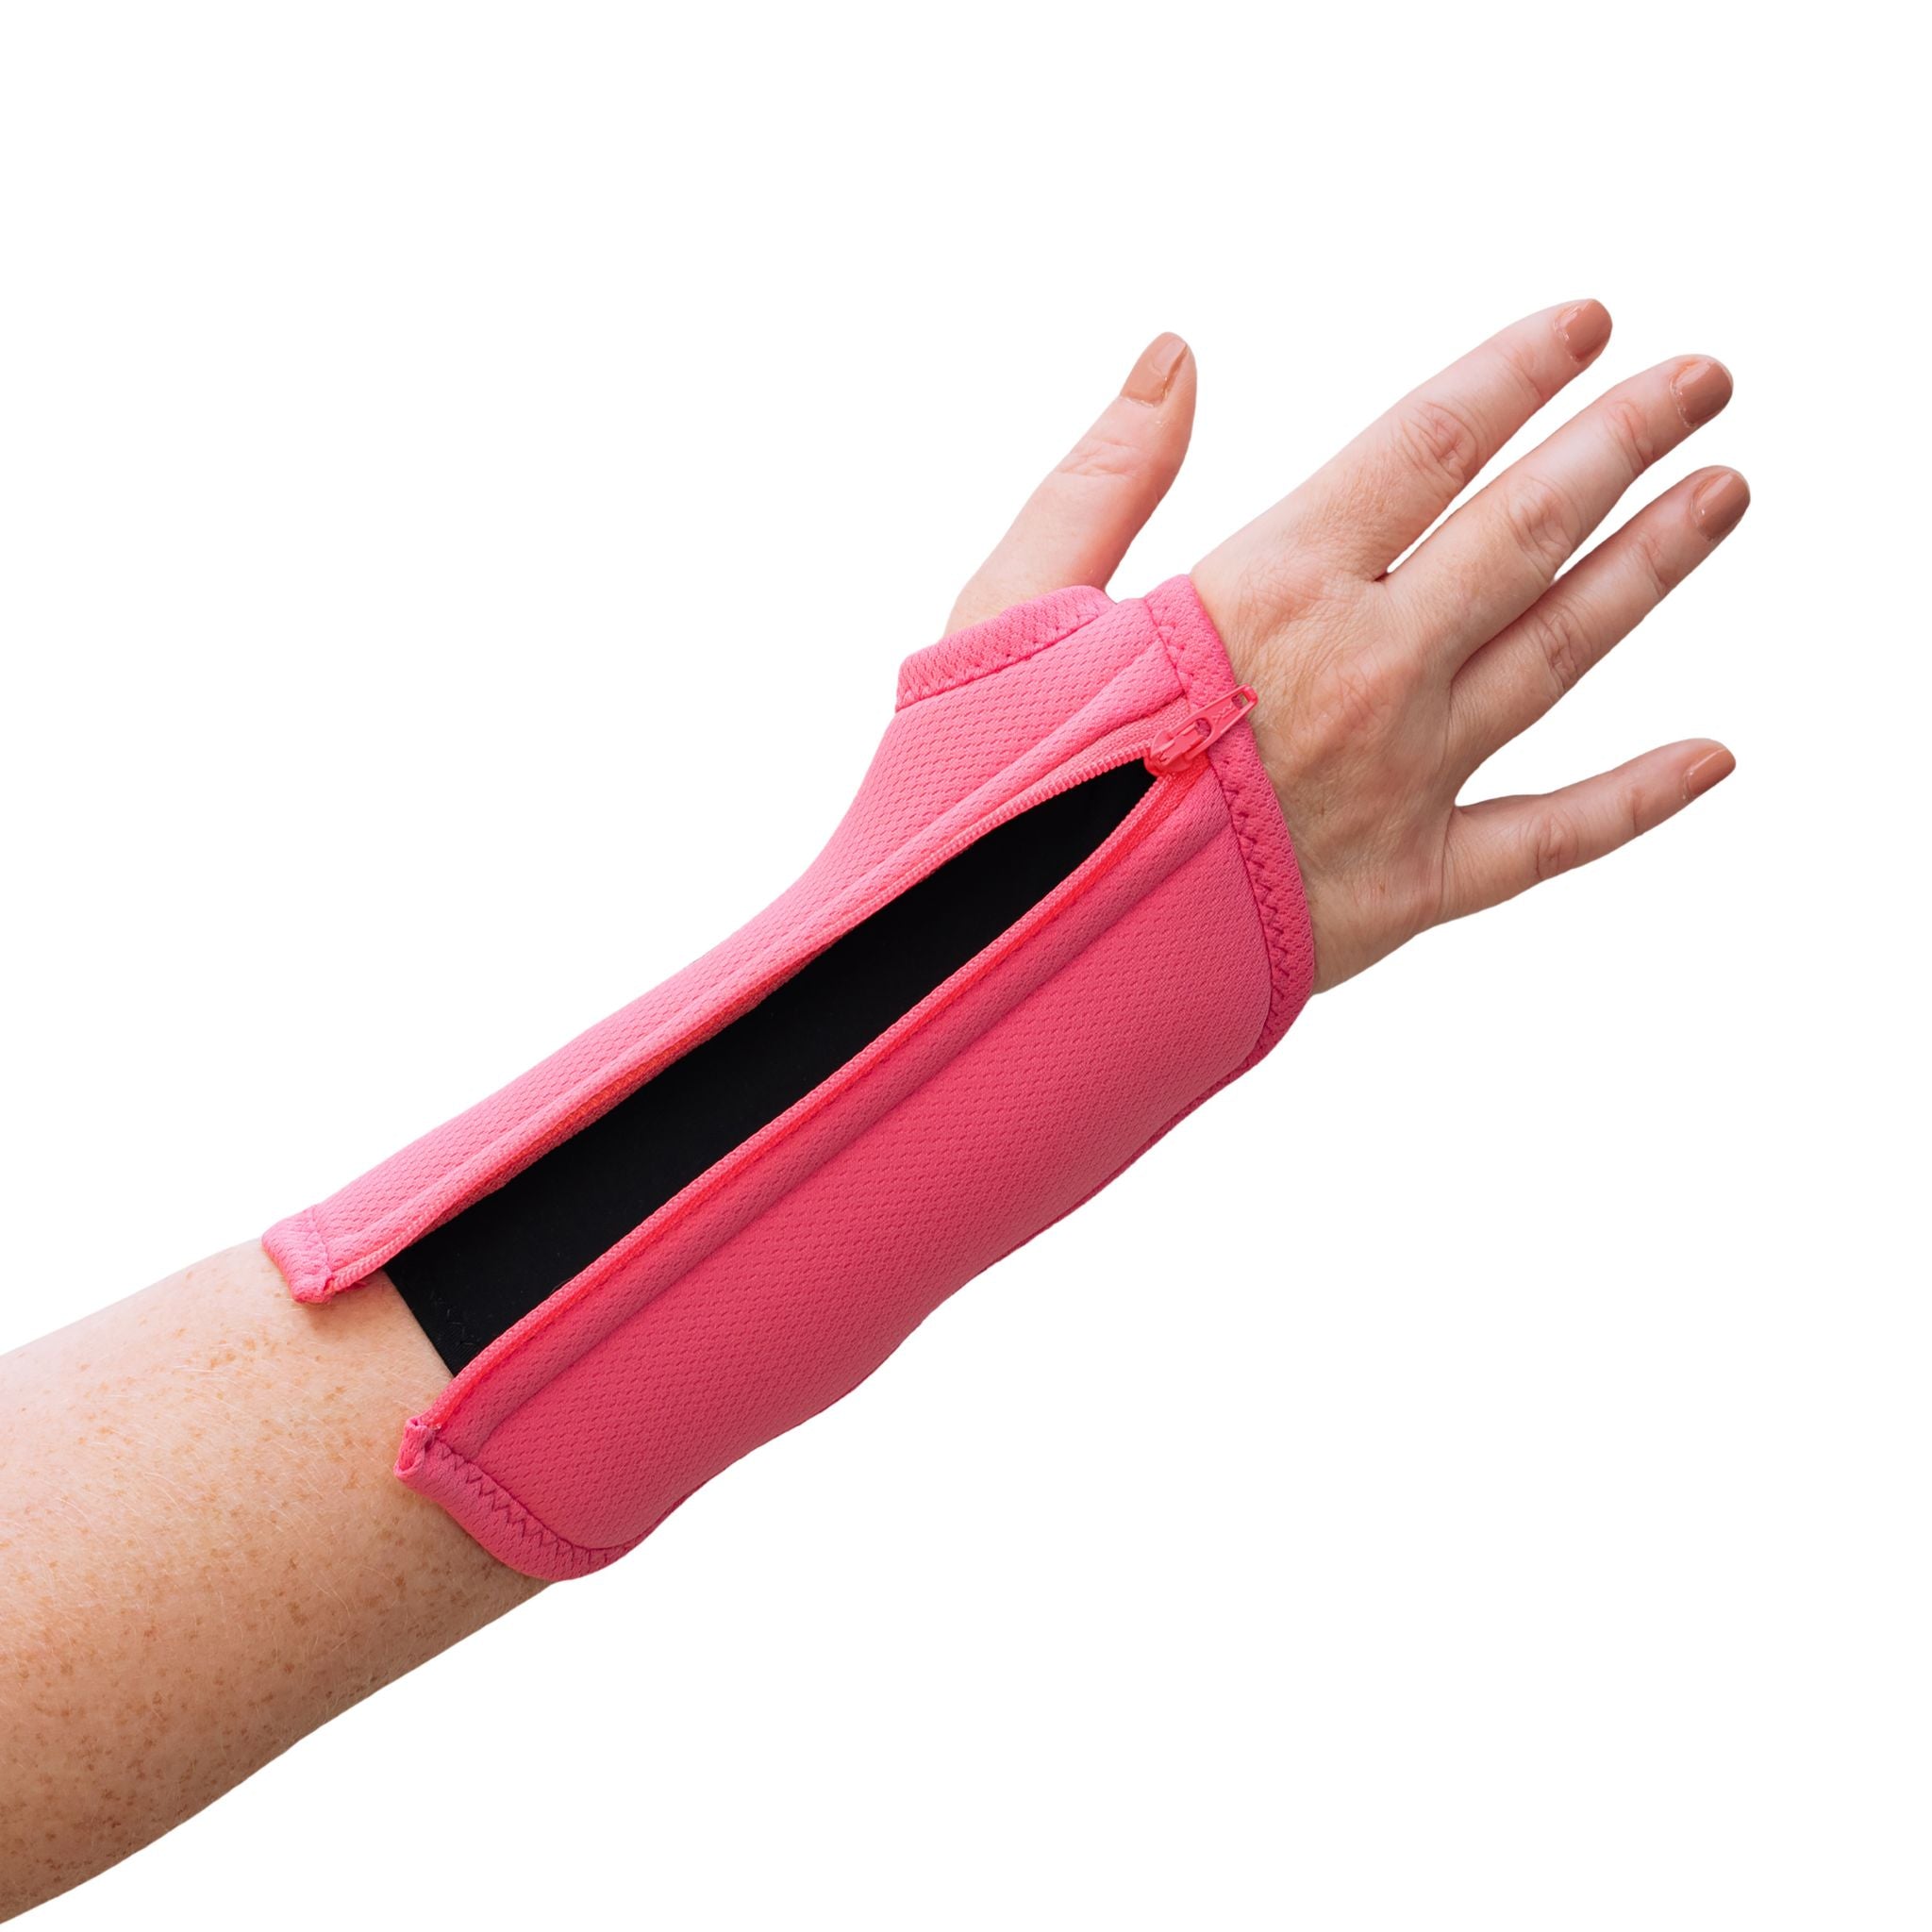 A woman with arthritis is showing her hand in a fully unzipped Bubblegum Pink Wrist Brace with zipper. Soft Moisture-wicking liner fabric can be seen from underneath. The background is white.